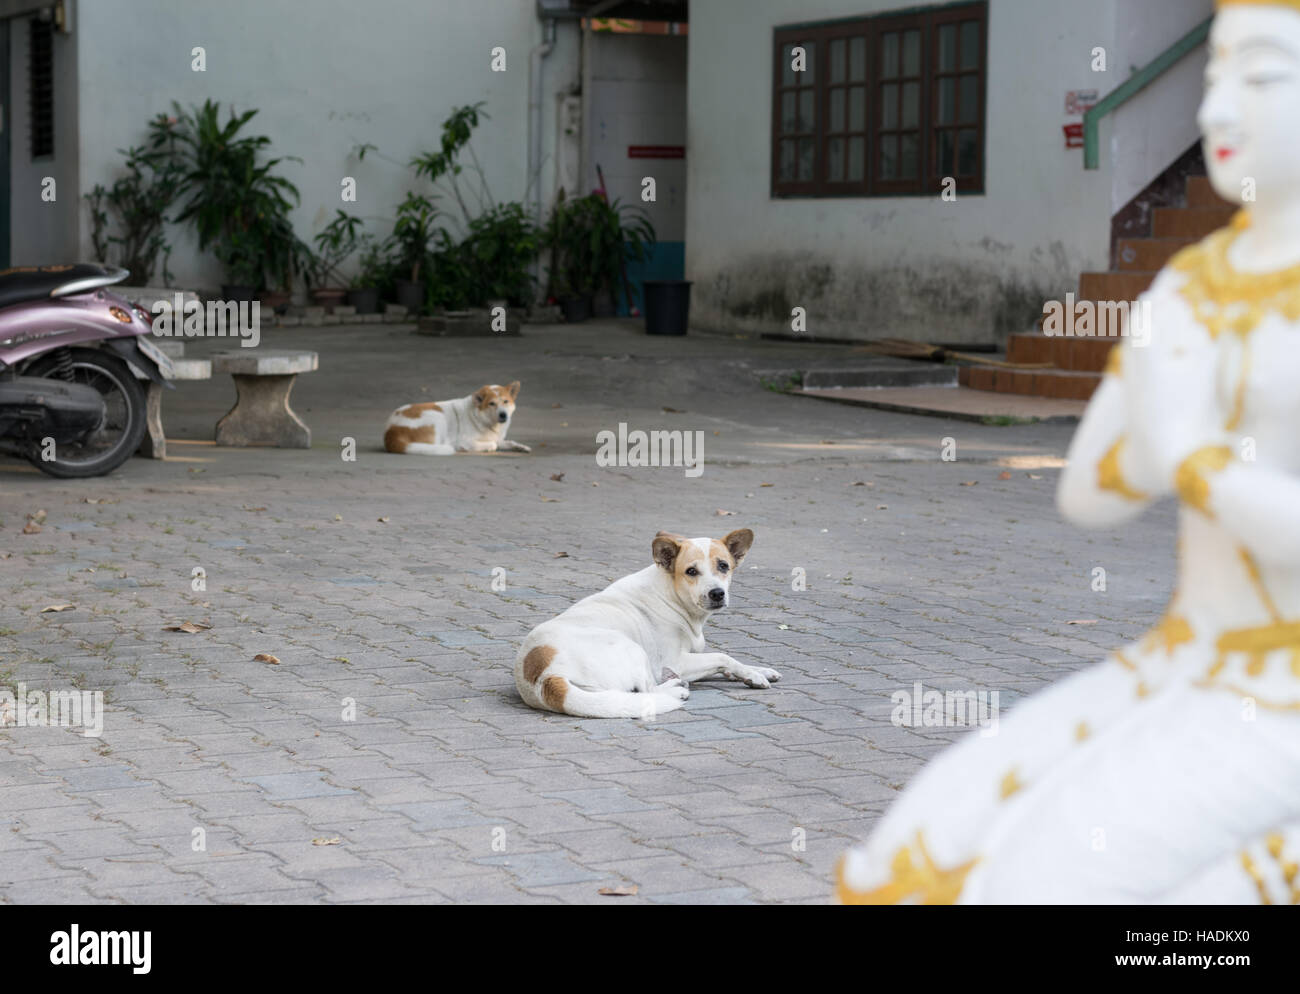 Soi dogs resting with Buddhist sculpture in foreground, Chiang Mai, Thailand Stock Photo